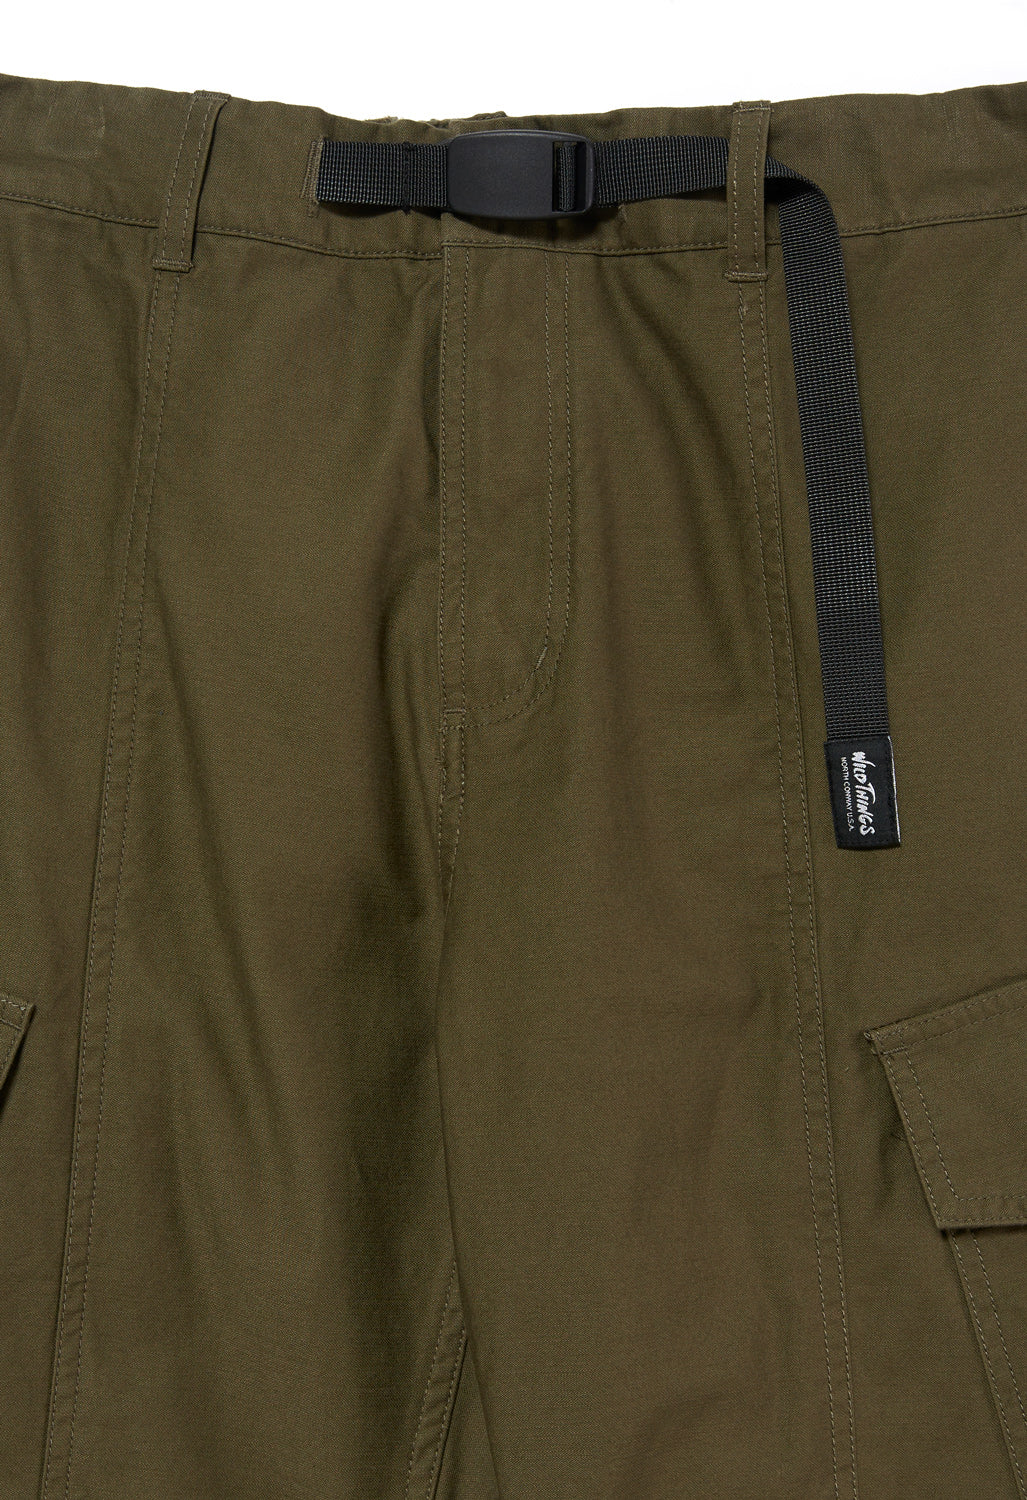 Wild Things Men's Field Cargo Pants - Military Green